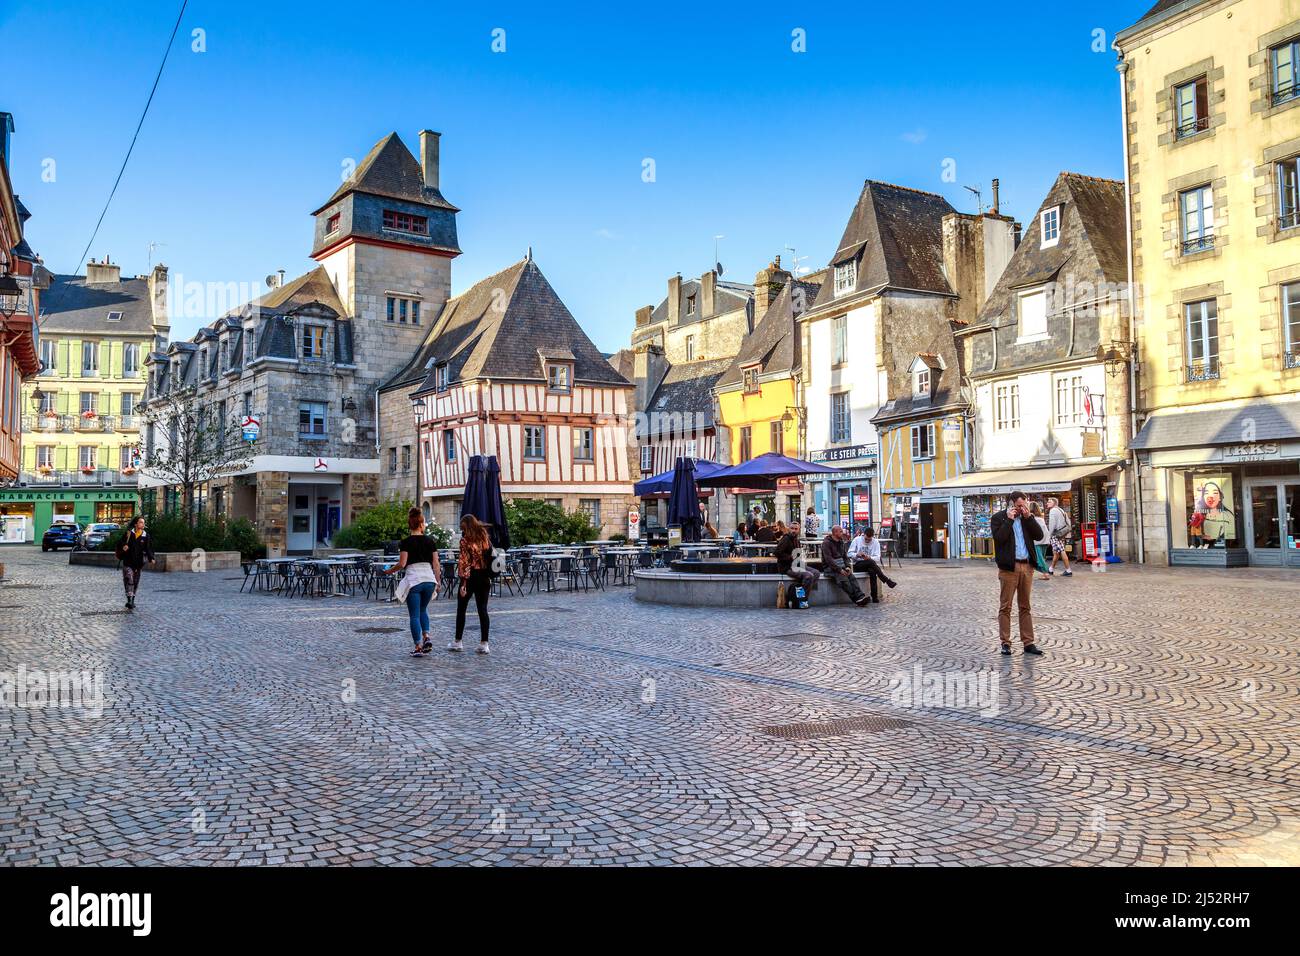 QUIMPER , FRANCE - SEPTEMBER 5, 2019: This is Place Terre au Duc, with half-timbered and stone medieval houses in the evening. Stock Photo